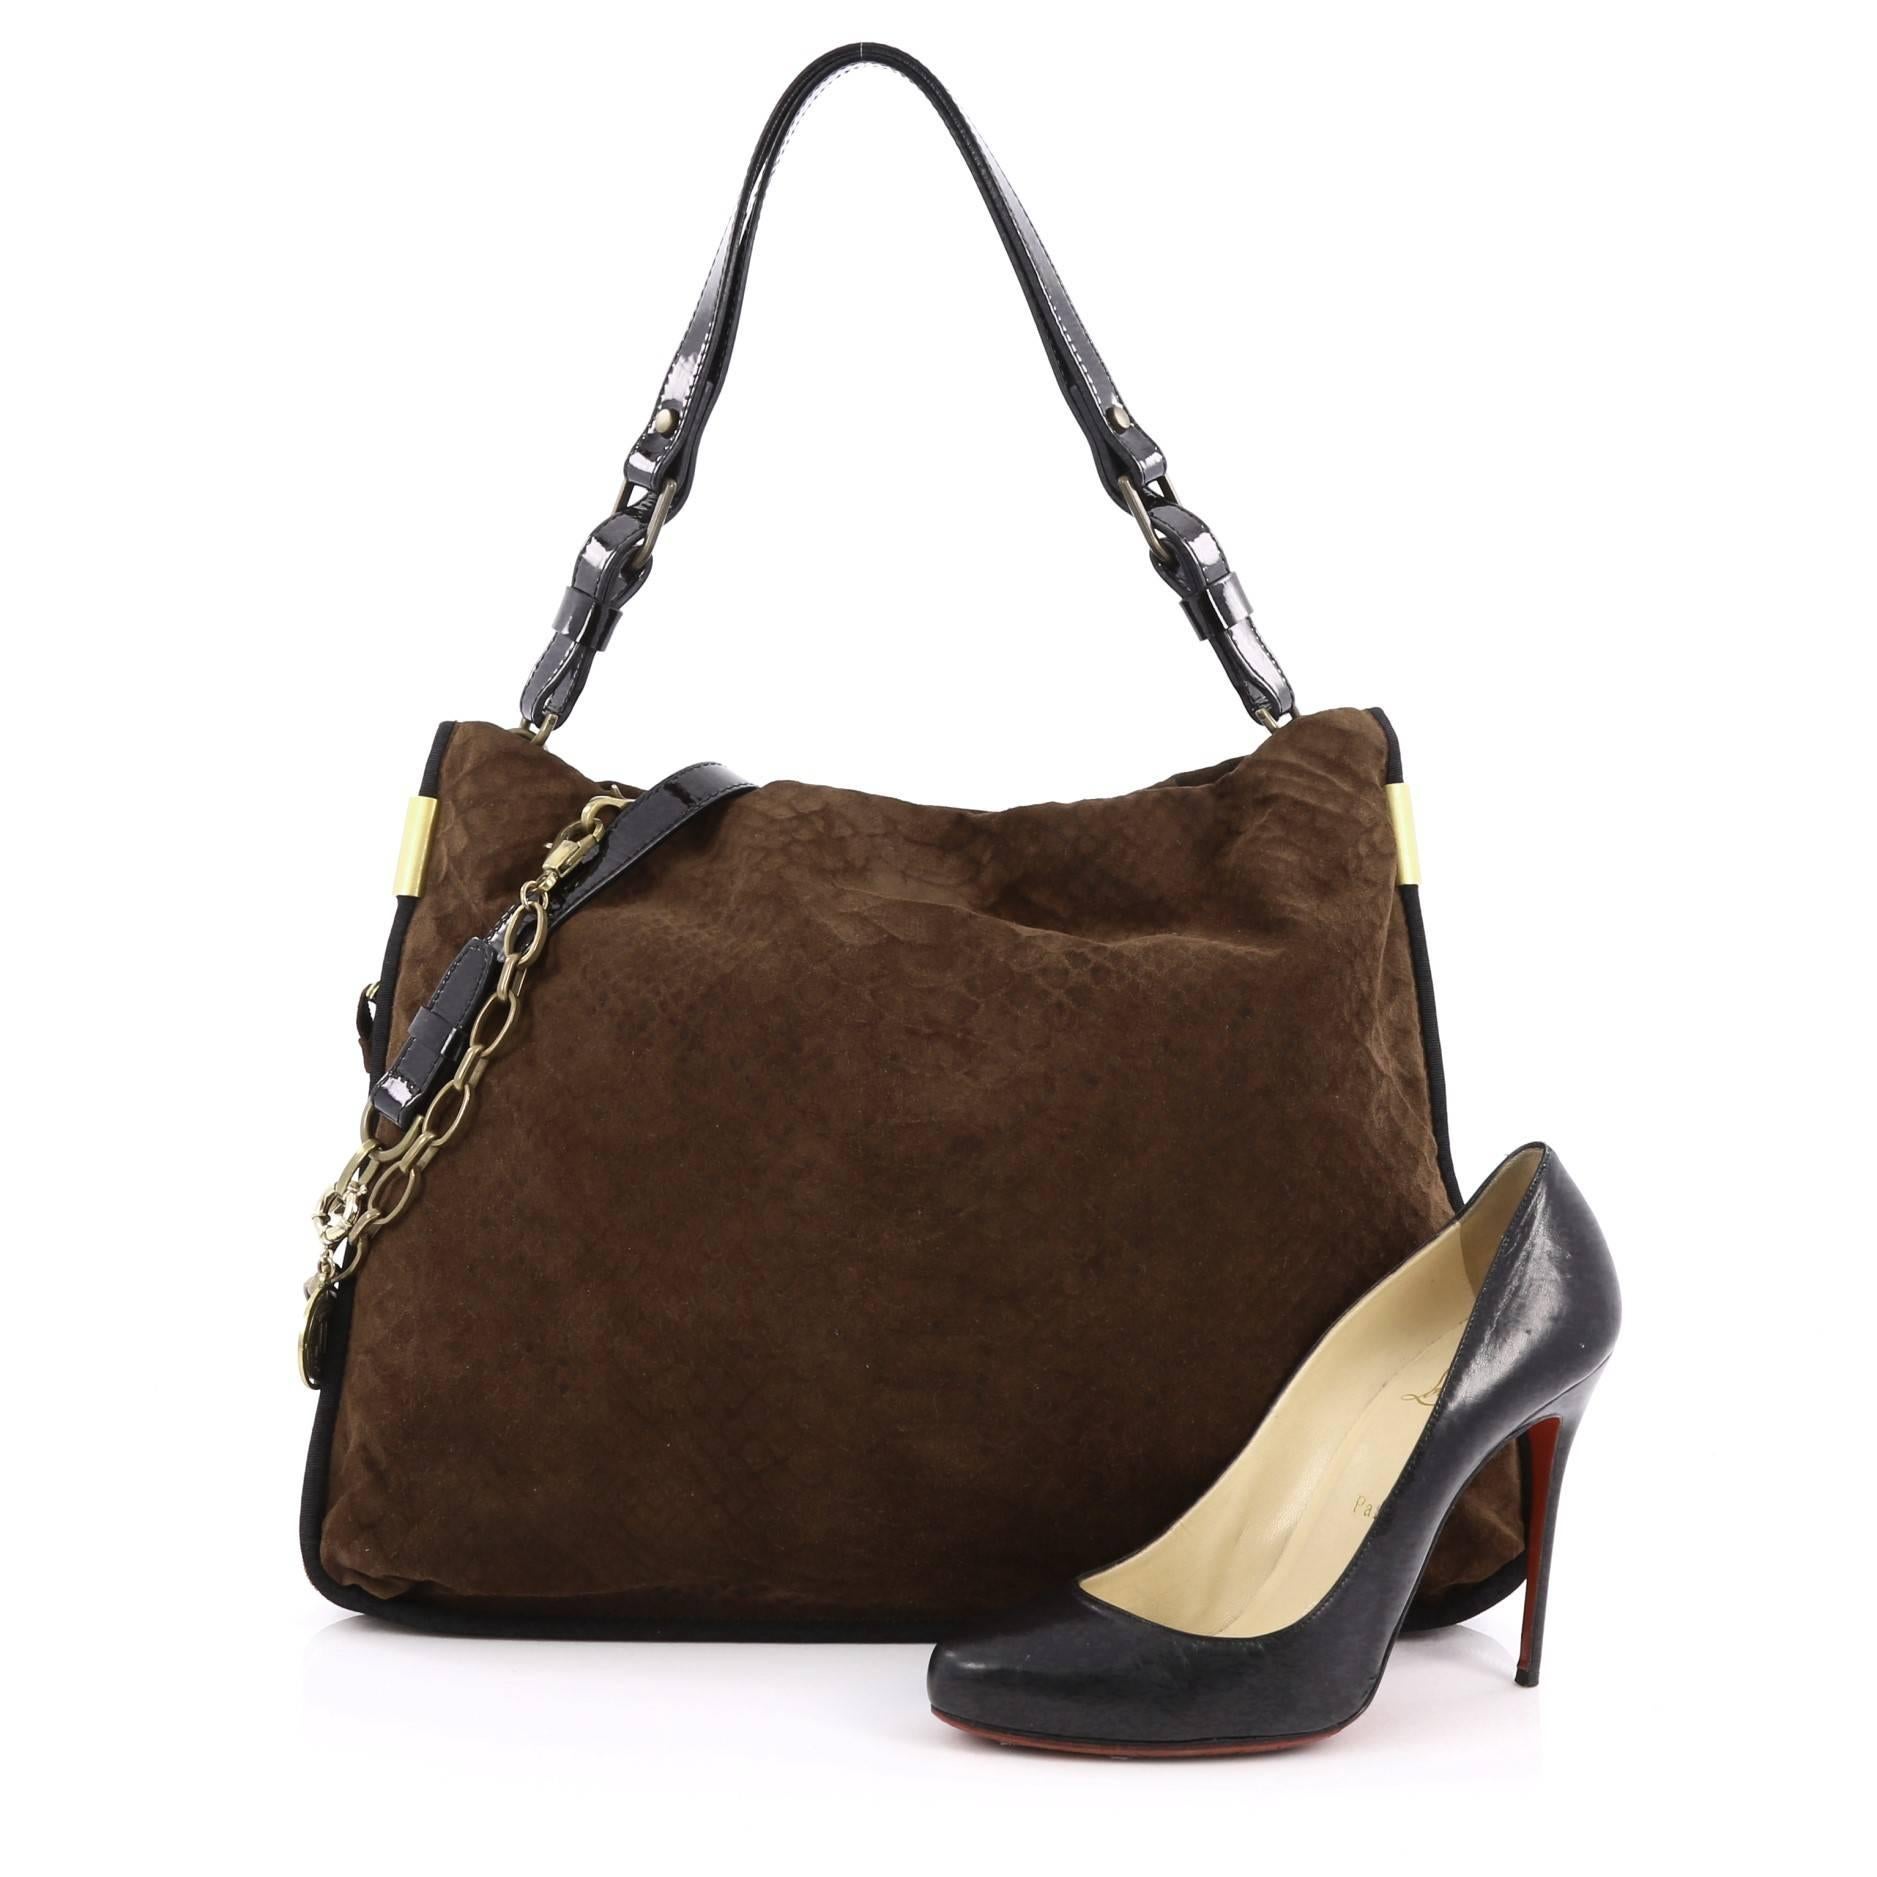 This authentic Lanvin Amalia Bucket Bag Python Embossed Suede Large is classic and feminine in design ideal for everyday use. Crafted from brown python embossed suede, this slouchy, oversized bag features polished chain straps with leather pad,